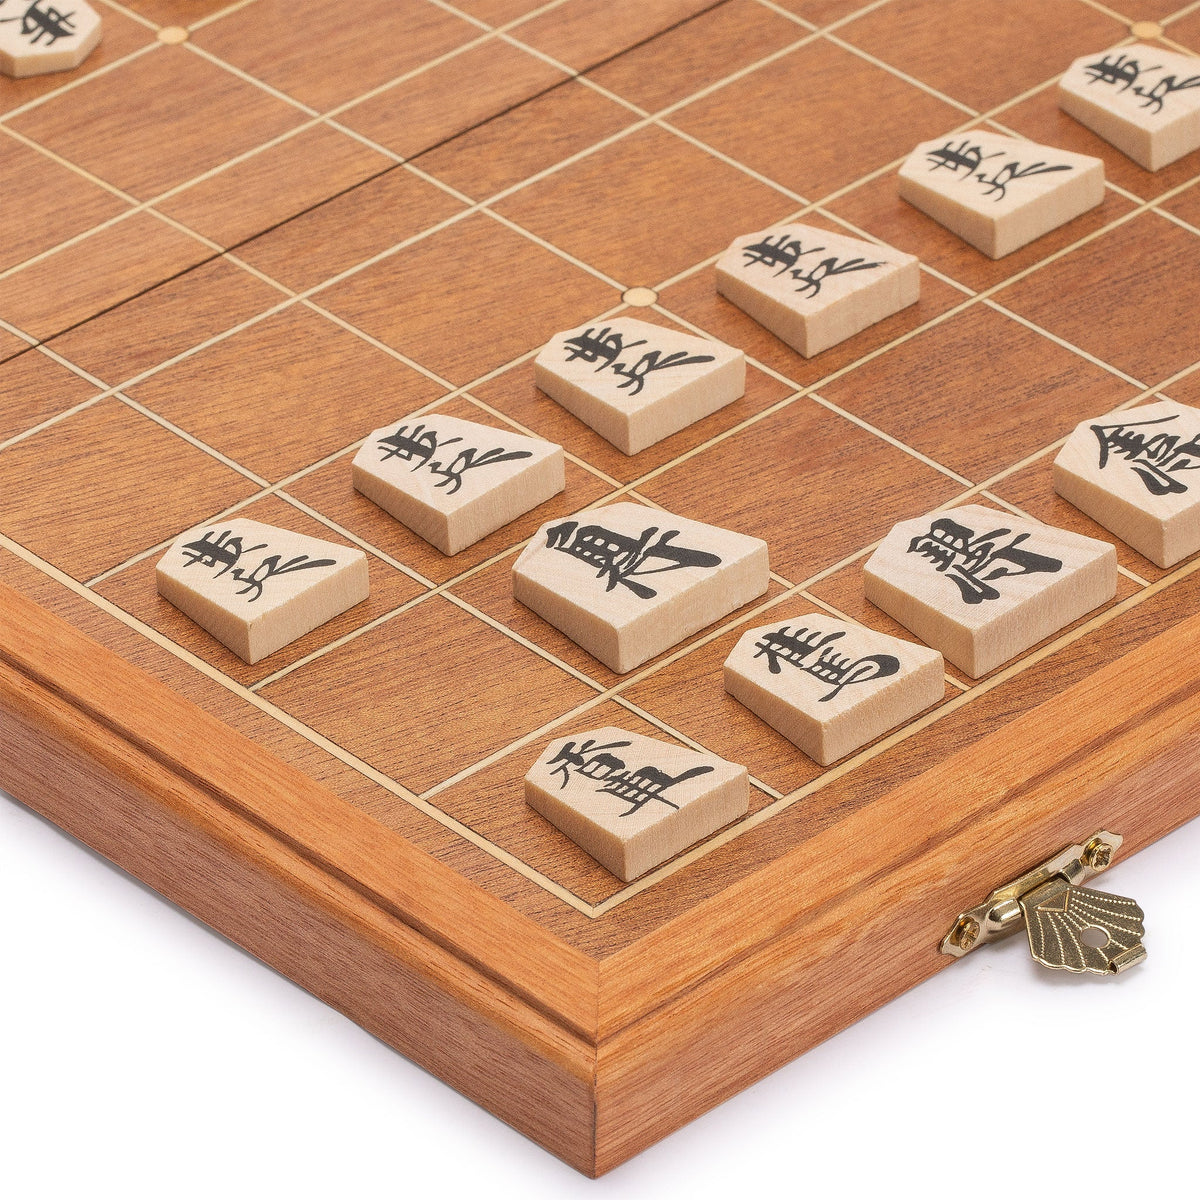 Jili Online New Study Shogi Japanese Chess with Wooden Folding Chessboard  for Beginners